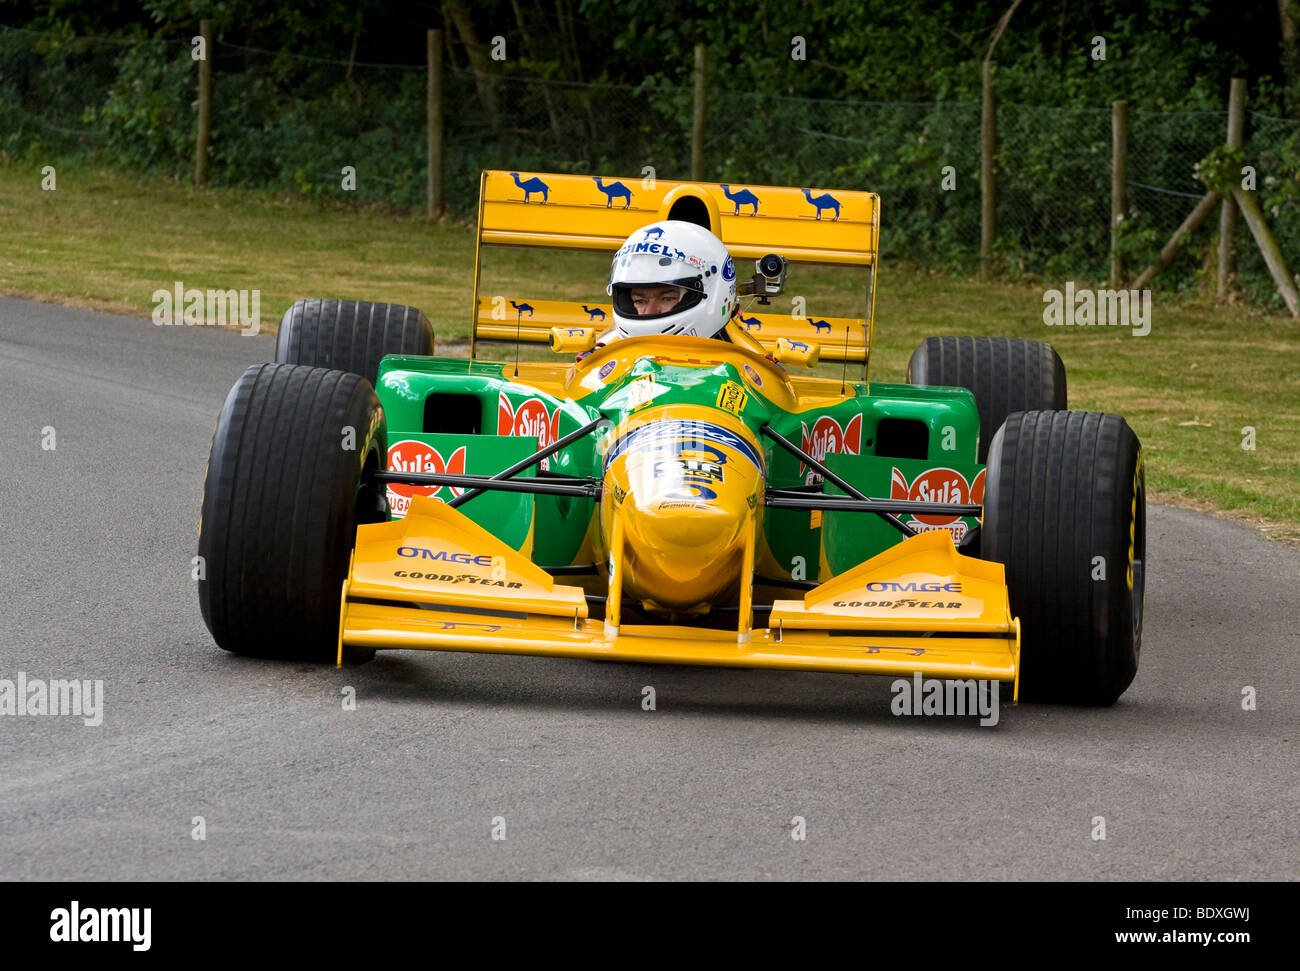 1993 Benetton-Ford B193 F1 car at the Goodwood Festival of Speed Stock  Photo - Alamy